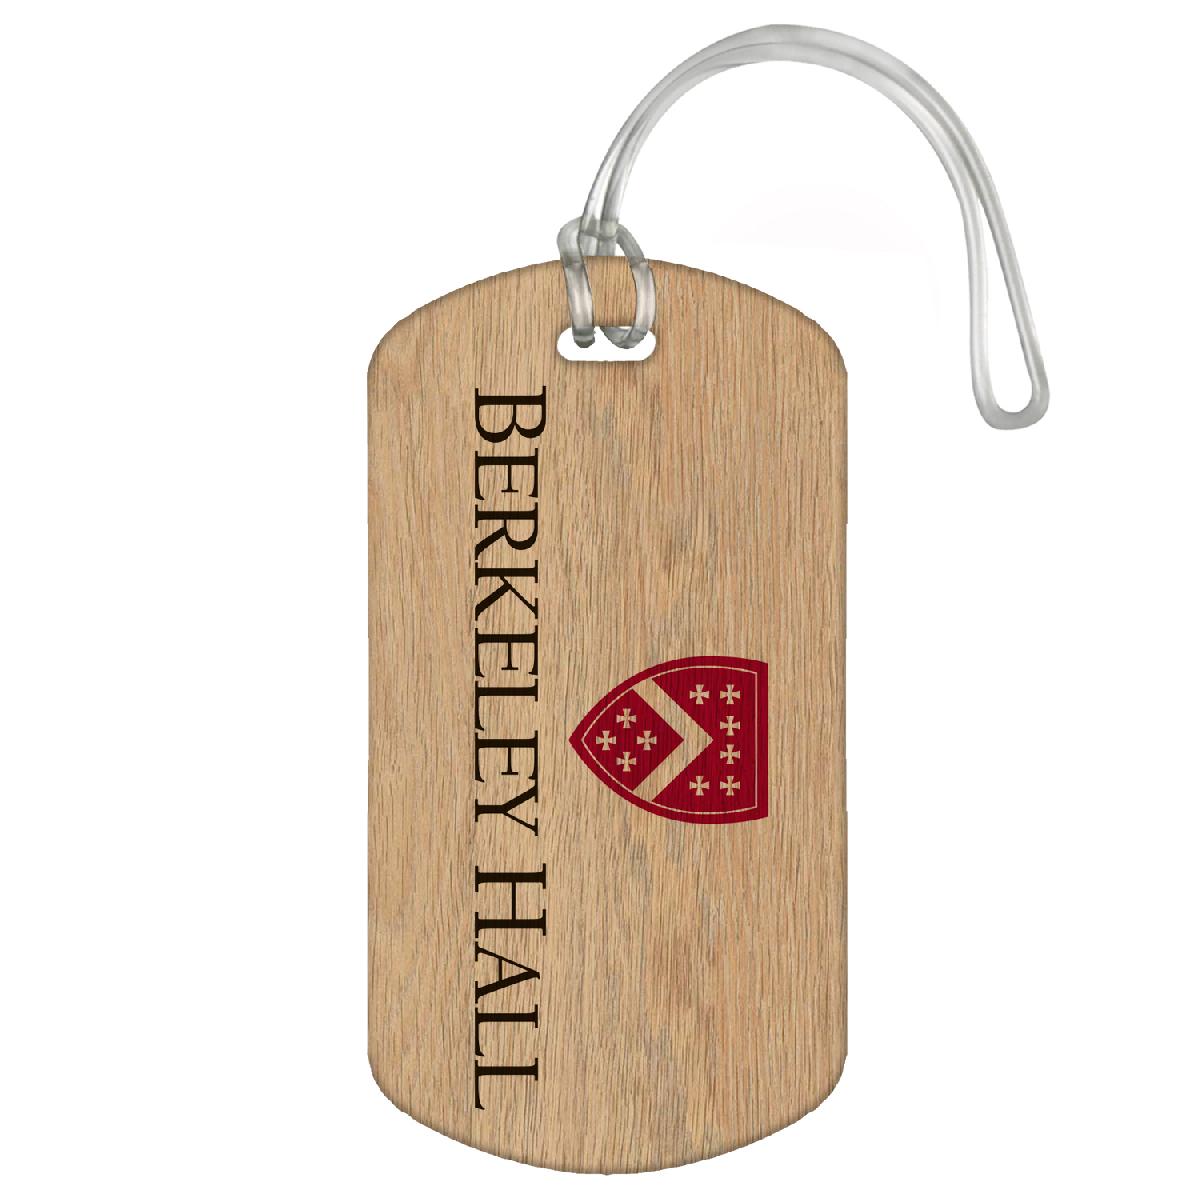 Wooden Bag Tag - 4.5" X 2.375" - 2 Sided Printing